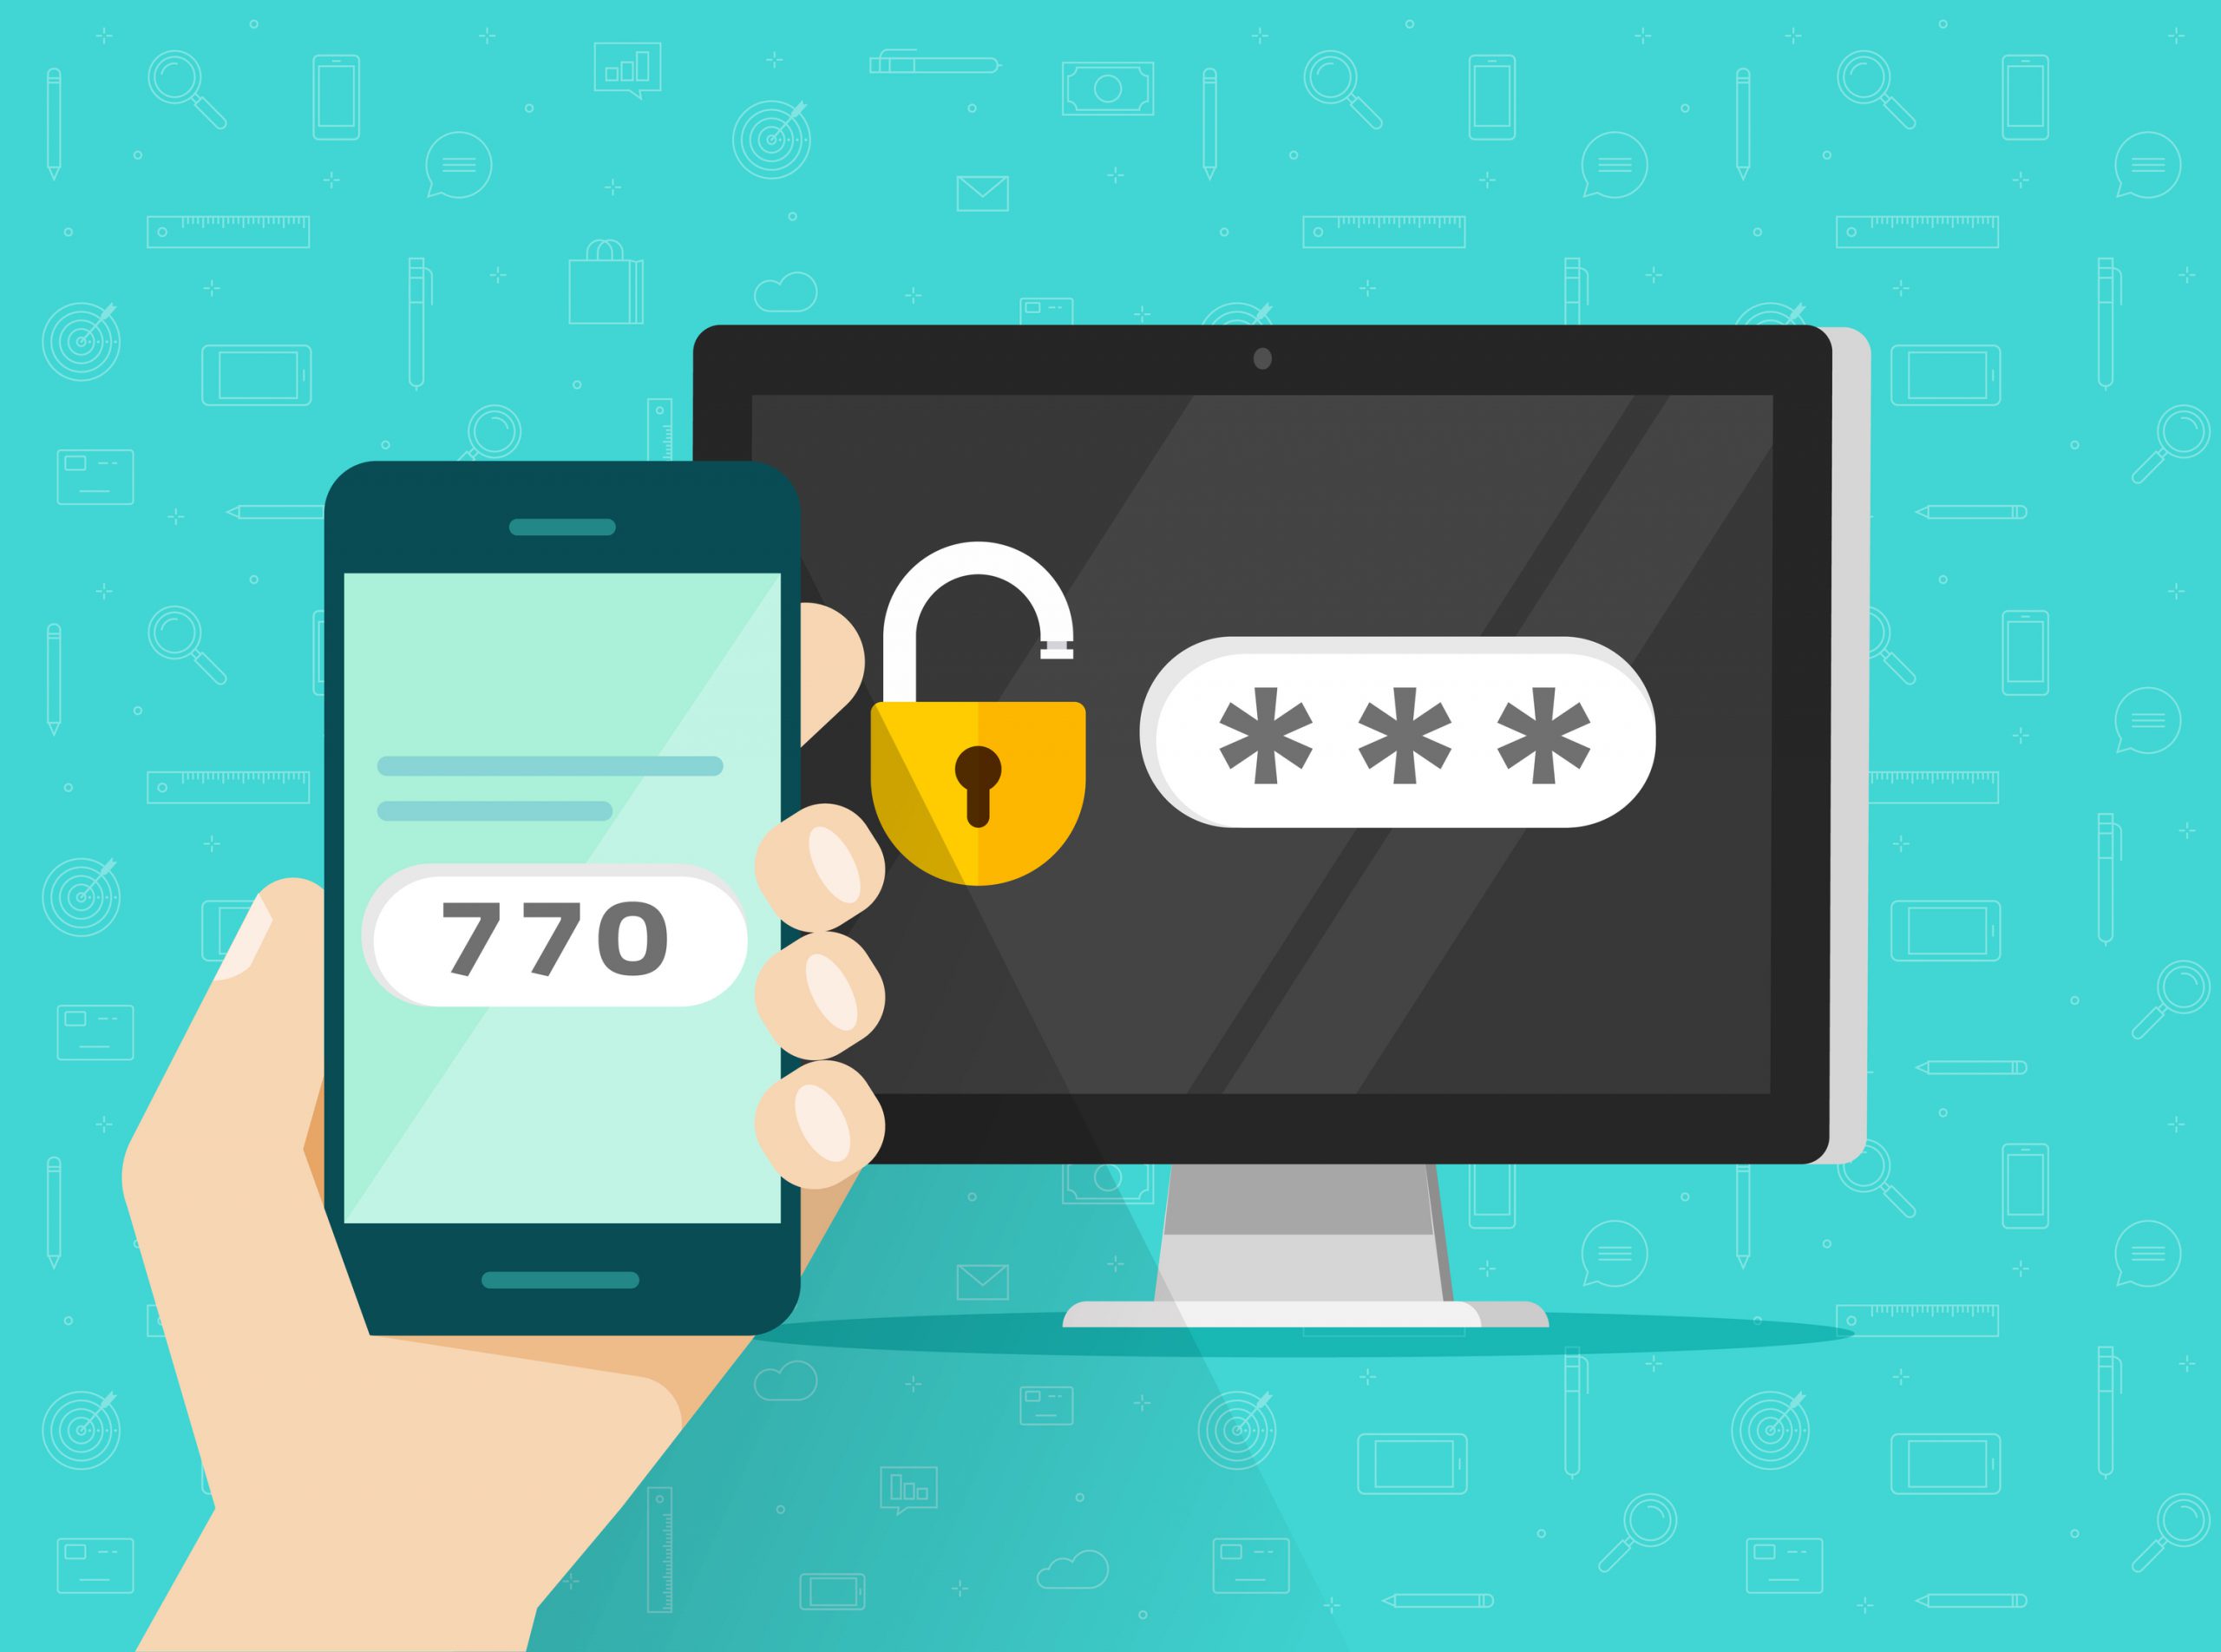 Why You Should Be Using Multi-Factor Authentication to Prevent Data Breaches